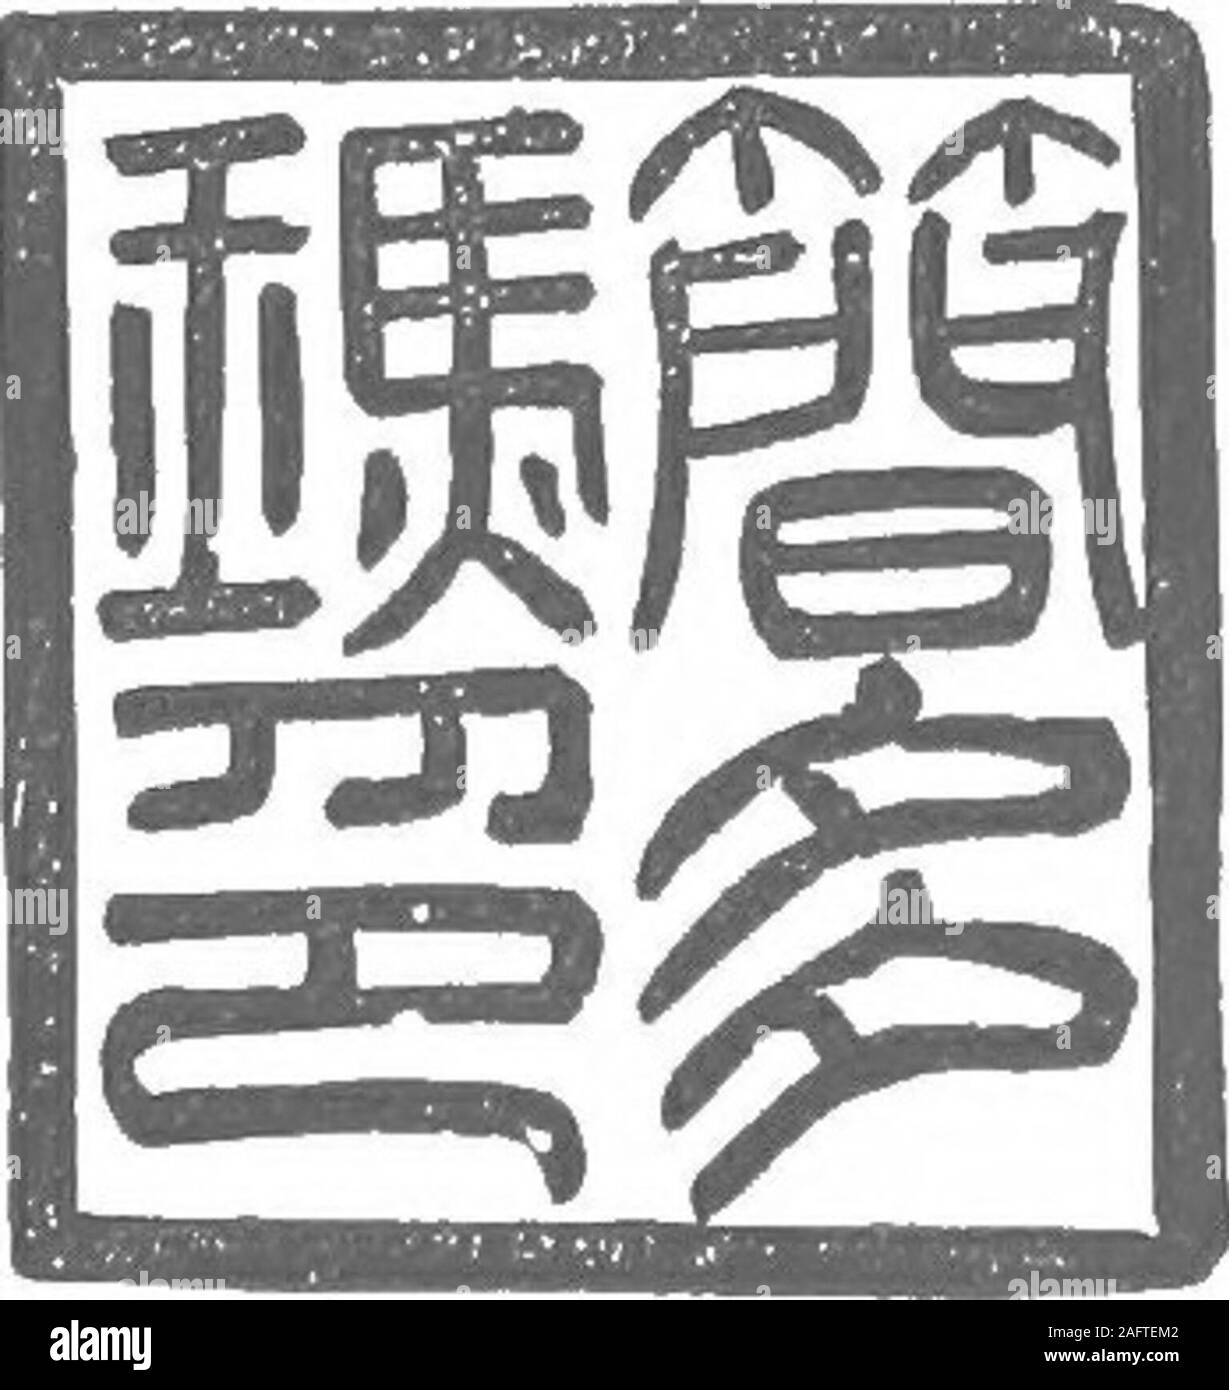 Tsze Teen Piao Muh: A Guide To The Dictionary (1907)